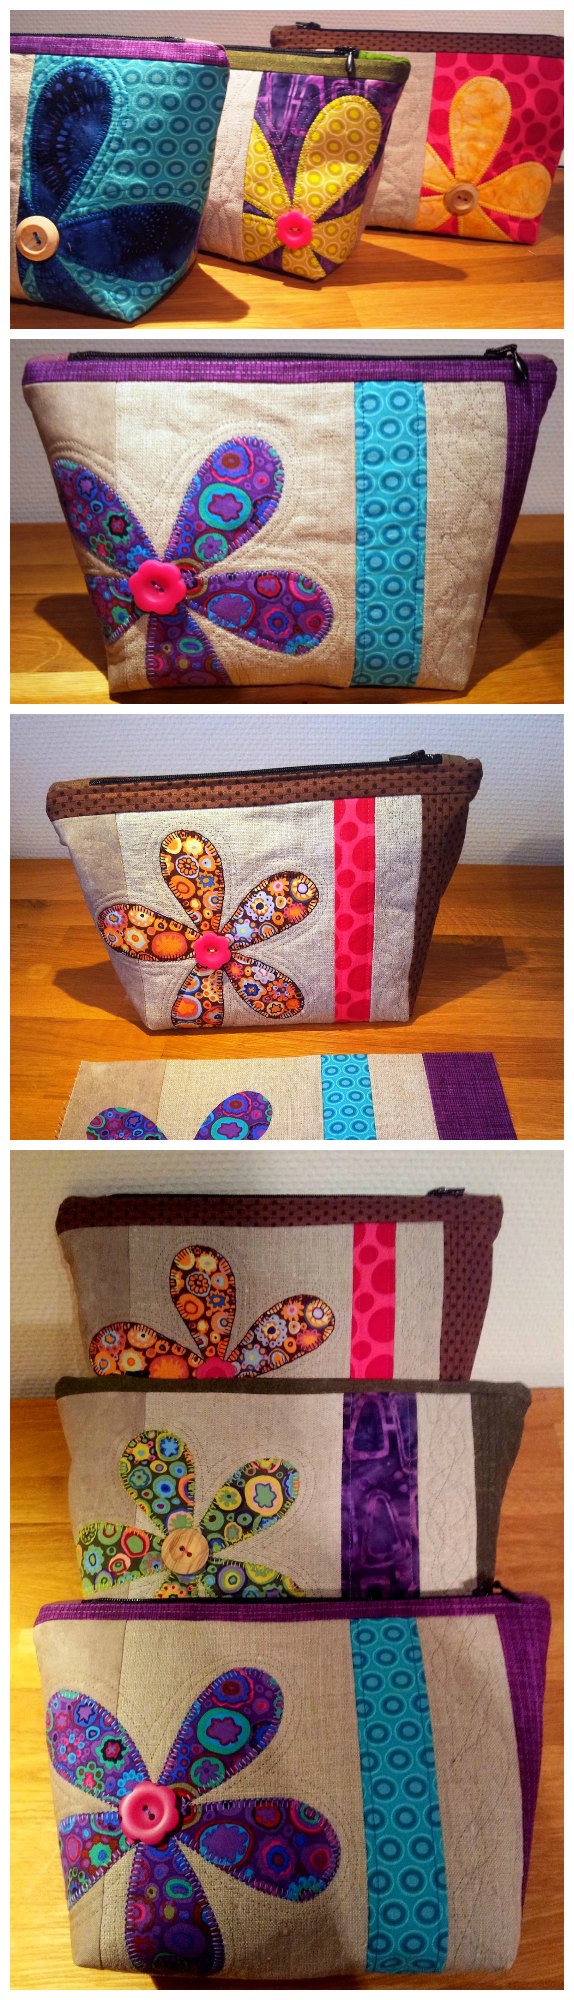 Free sewing pattern. With applique, quilting, flowers, bright fabrics, pieced panels, etc, these cute cosmetics bags are a great way to teach sewing or practice your skills too. Can't stop making them!